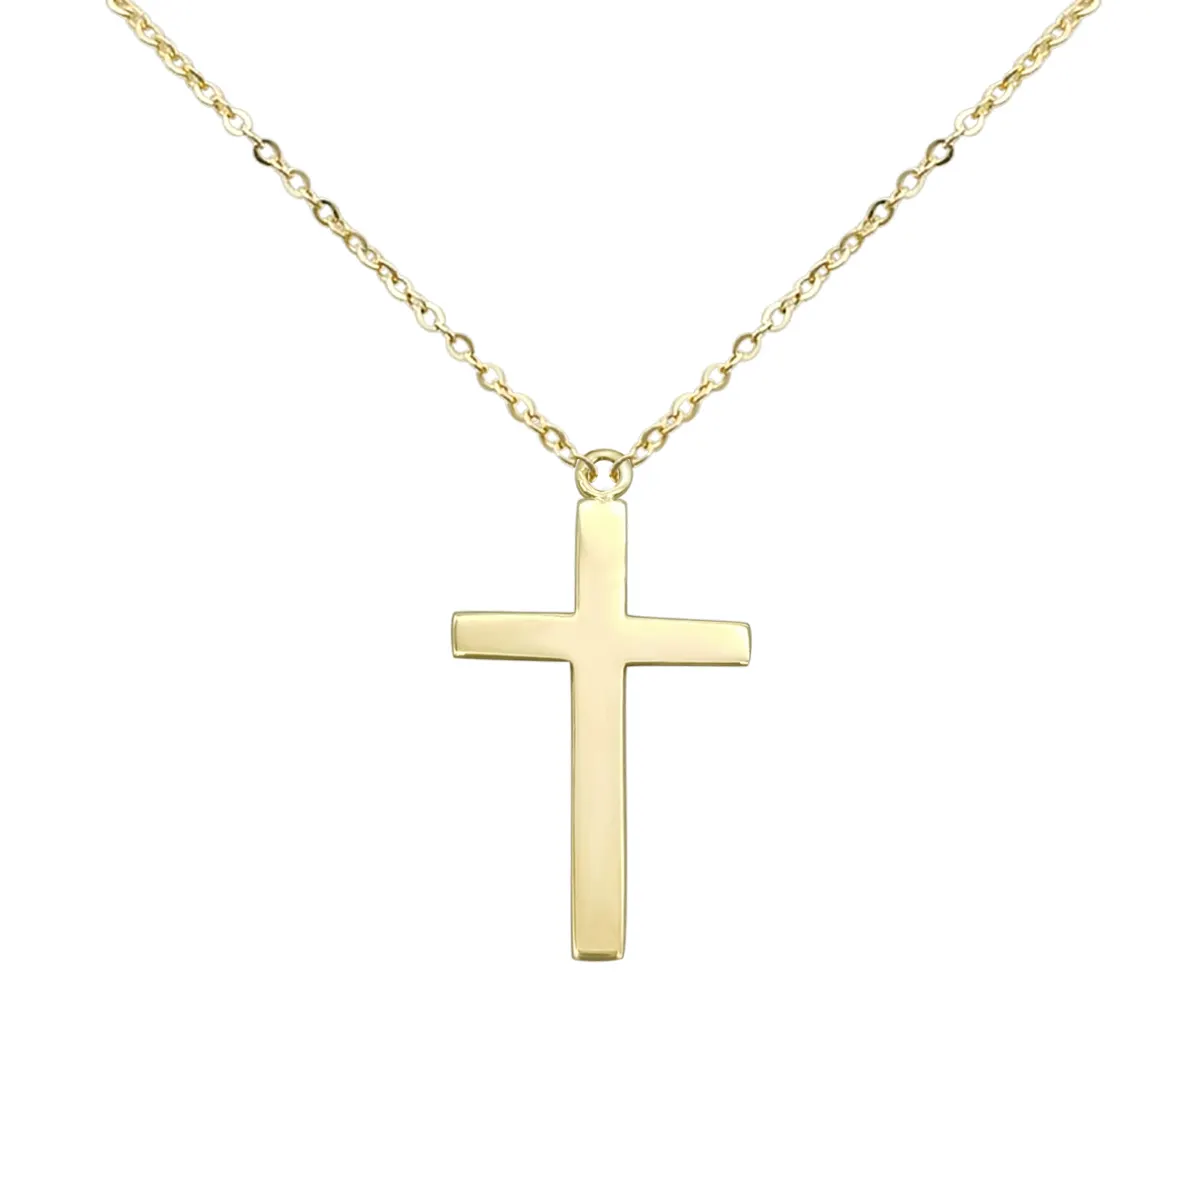 Gold Christian Cross Pendant Necklace Link Chain Fine Jewelry 9K 14K Solid Custom Logo Necklaces Trendy Yellow Gold 2 Pcs 40+5cm